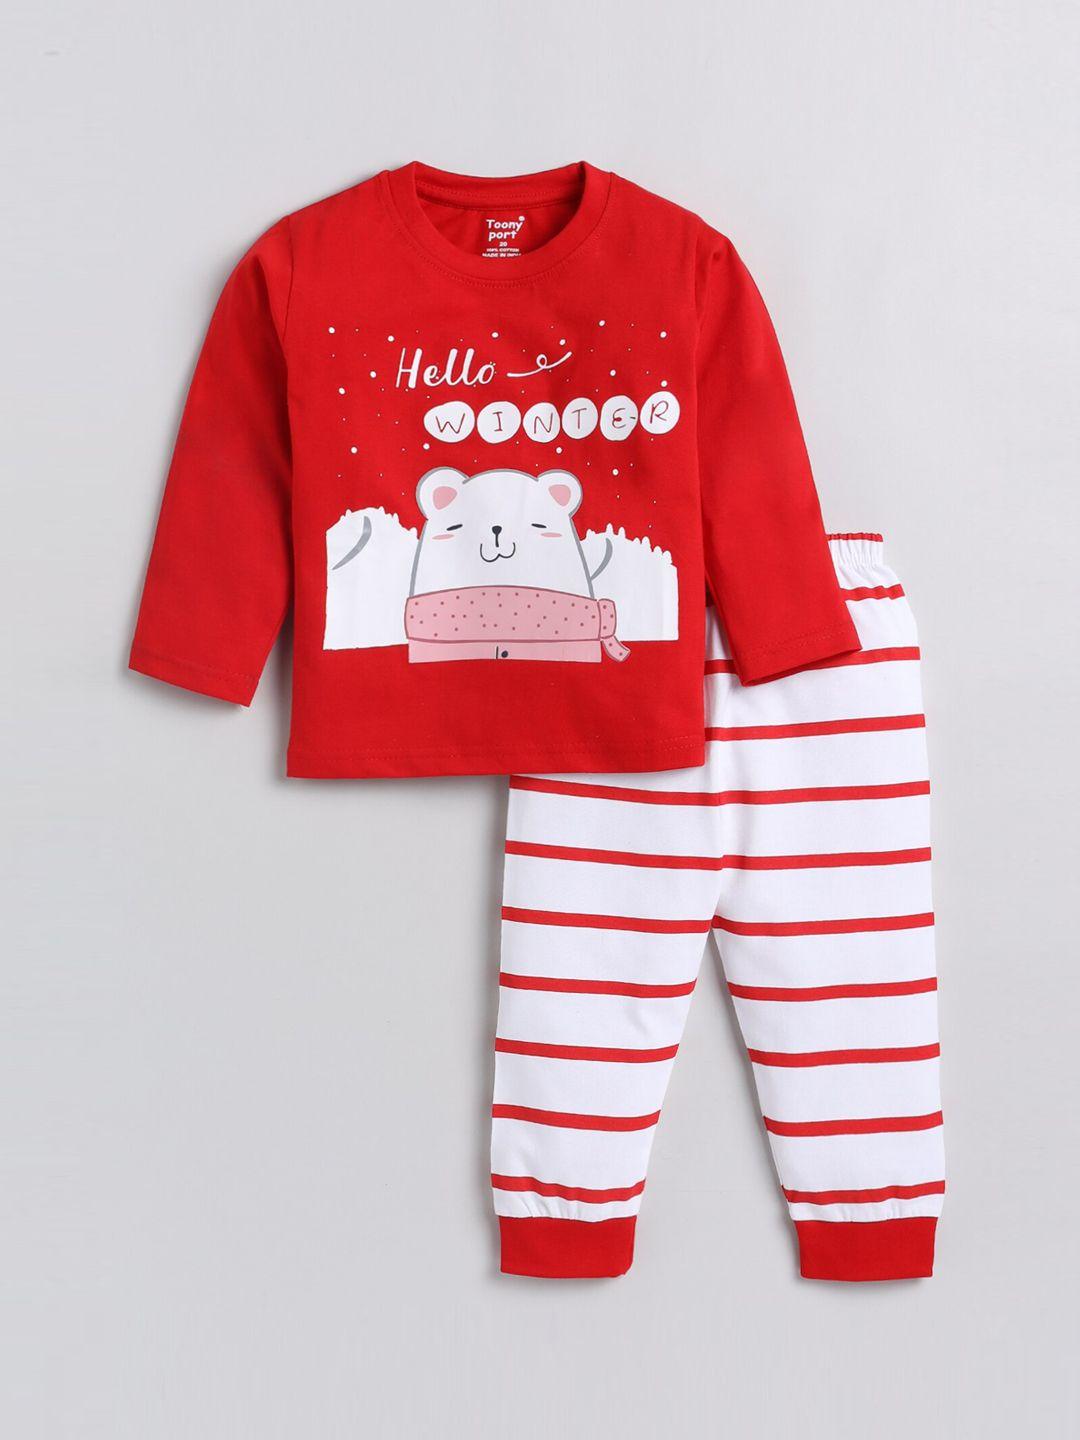 Toonyport Kids Red & White Printed Cotton Clothing Set